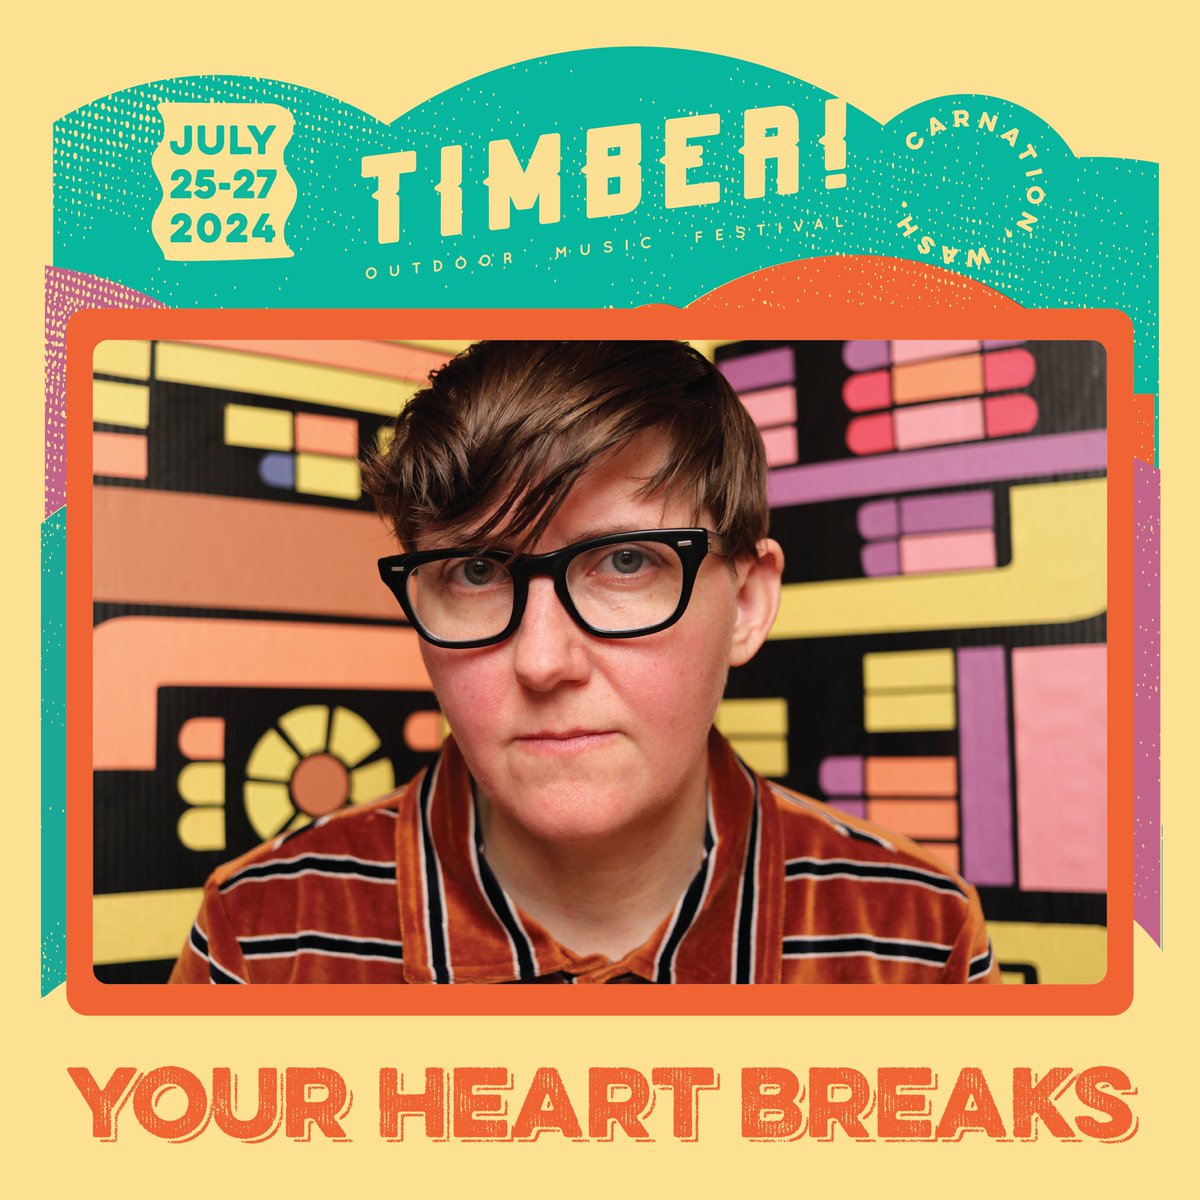 Your Heart Breaks is bringing indie pop delight to Timber! on Thursday, July 25. 💥 Get your tickets at timbermusicfest.com. #timberfest